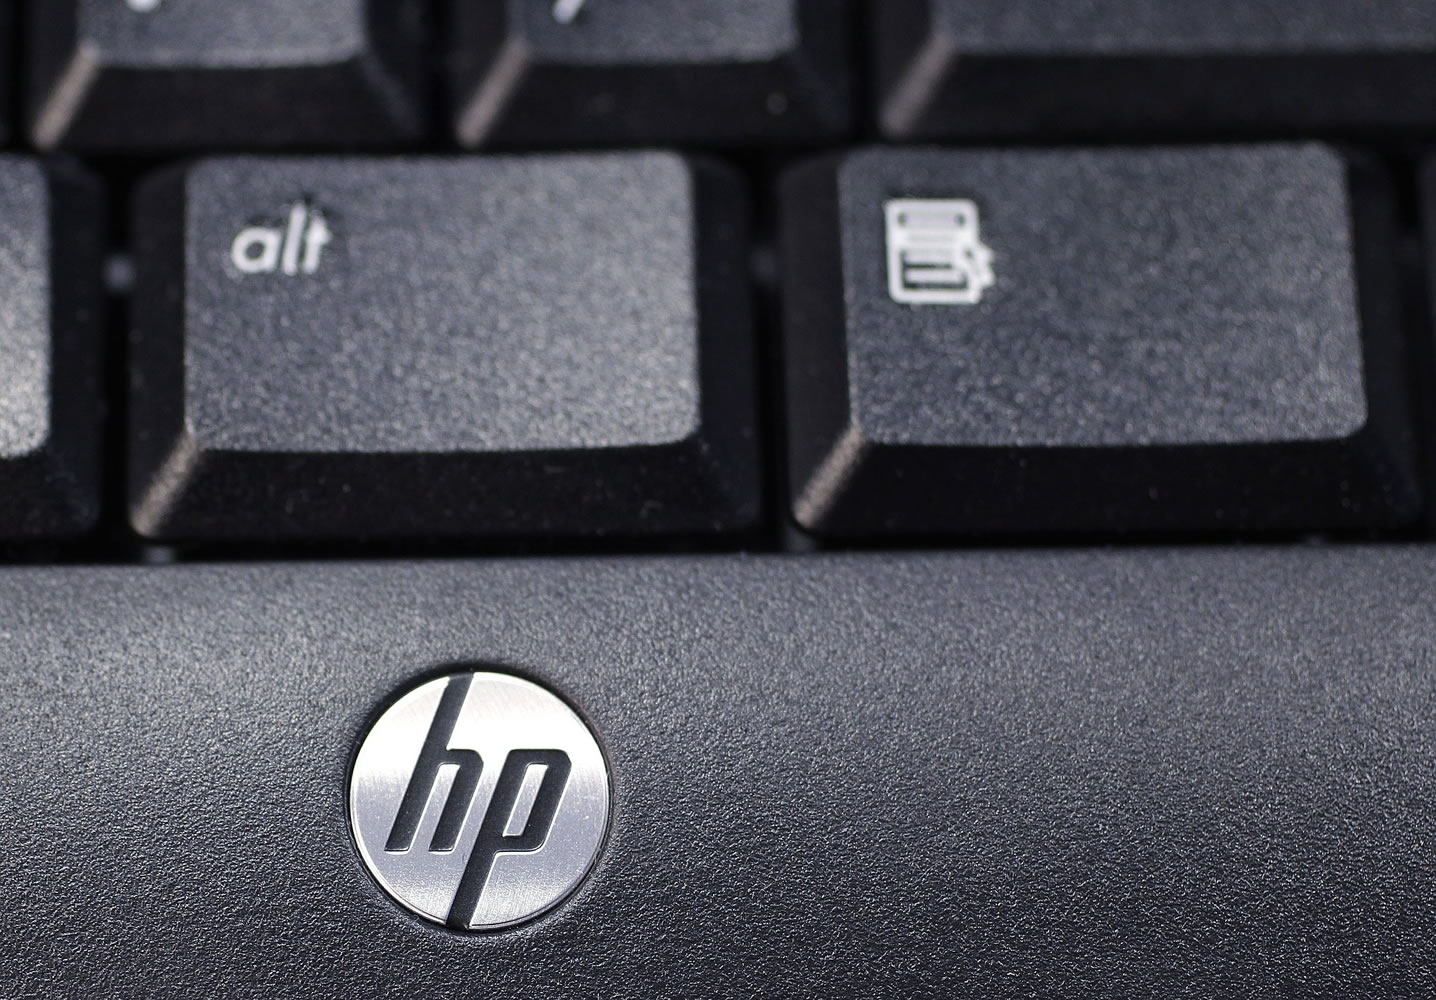 Associated Press files
The company logo on a Hewlett-Packard keyboard at the Micro Center computer store in Santa Clara, Calif.